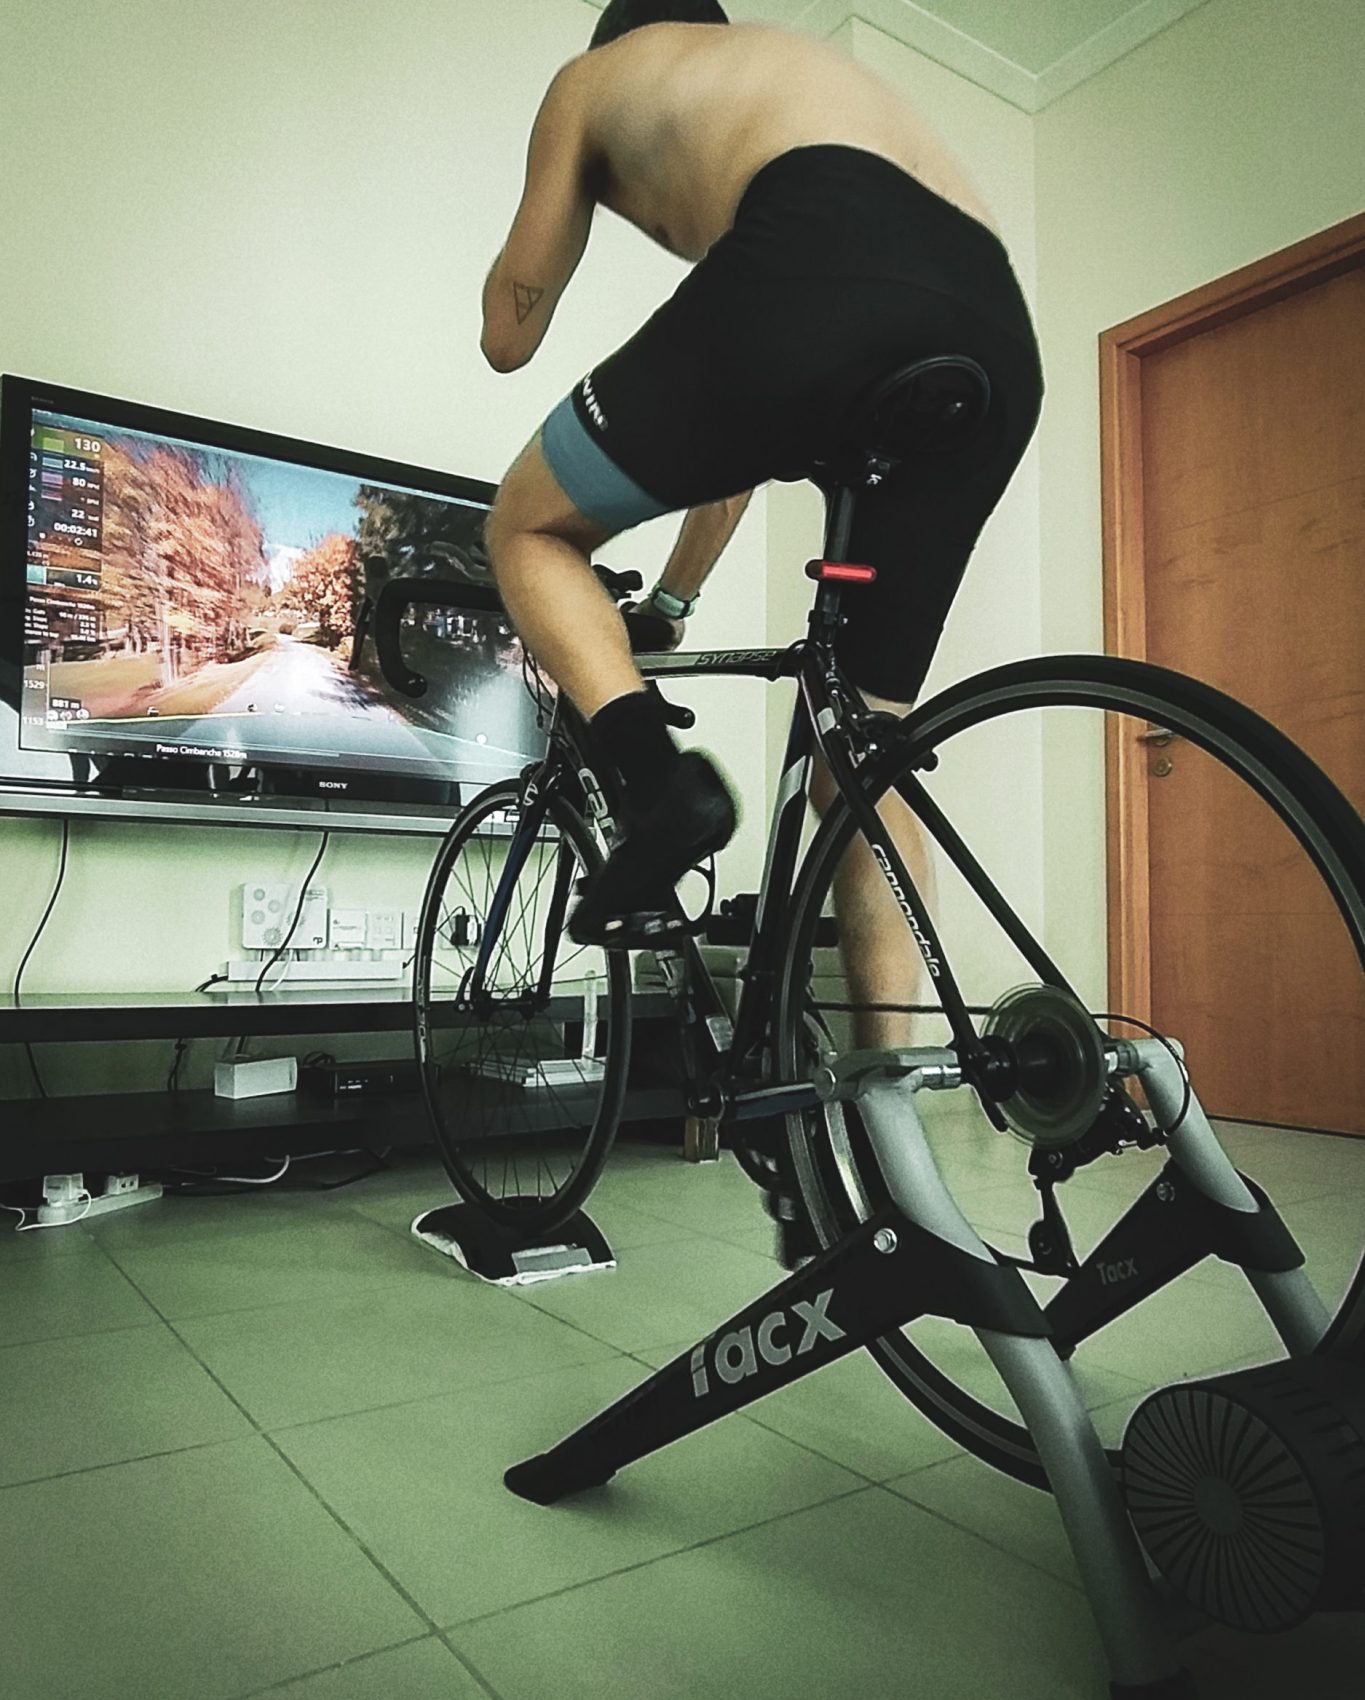 KK in Tacx indoor cycling